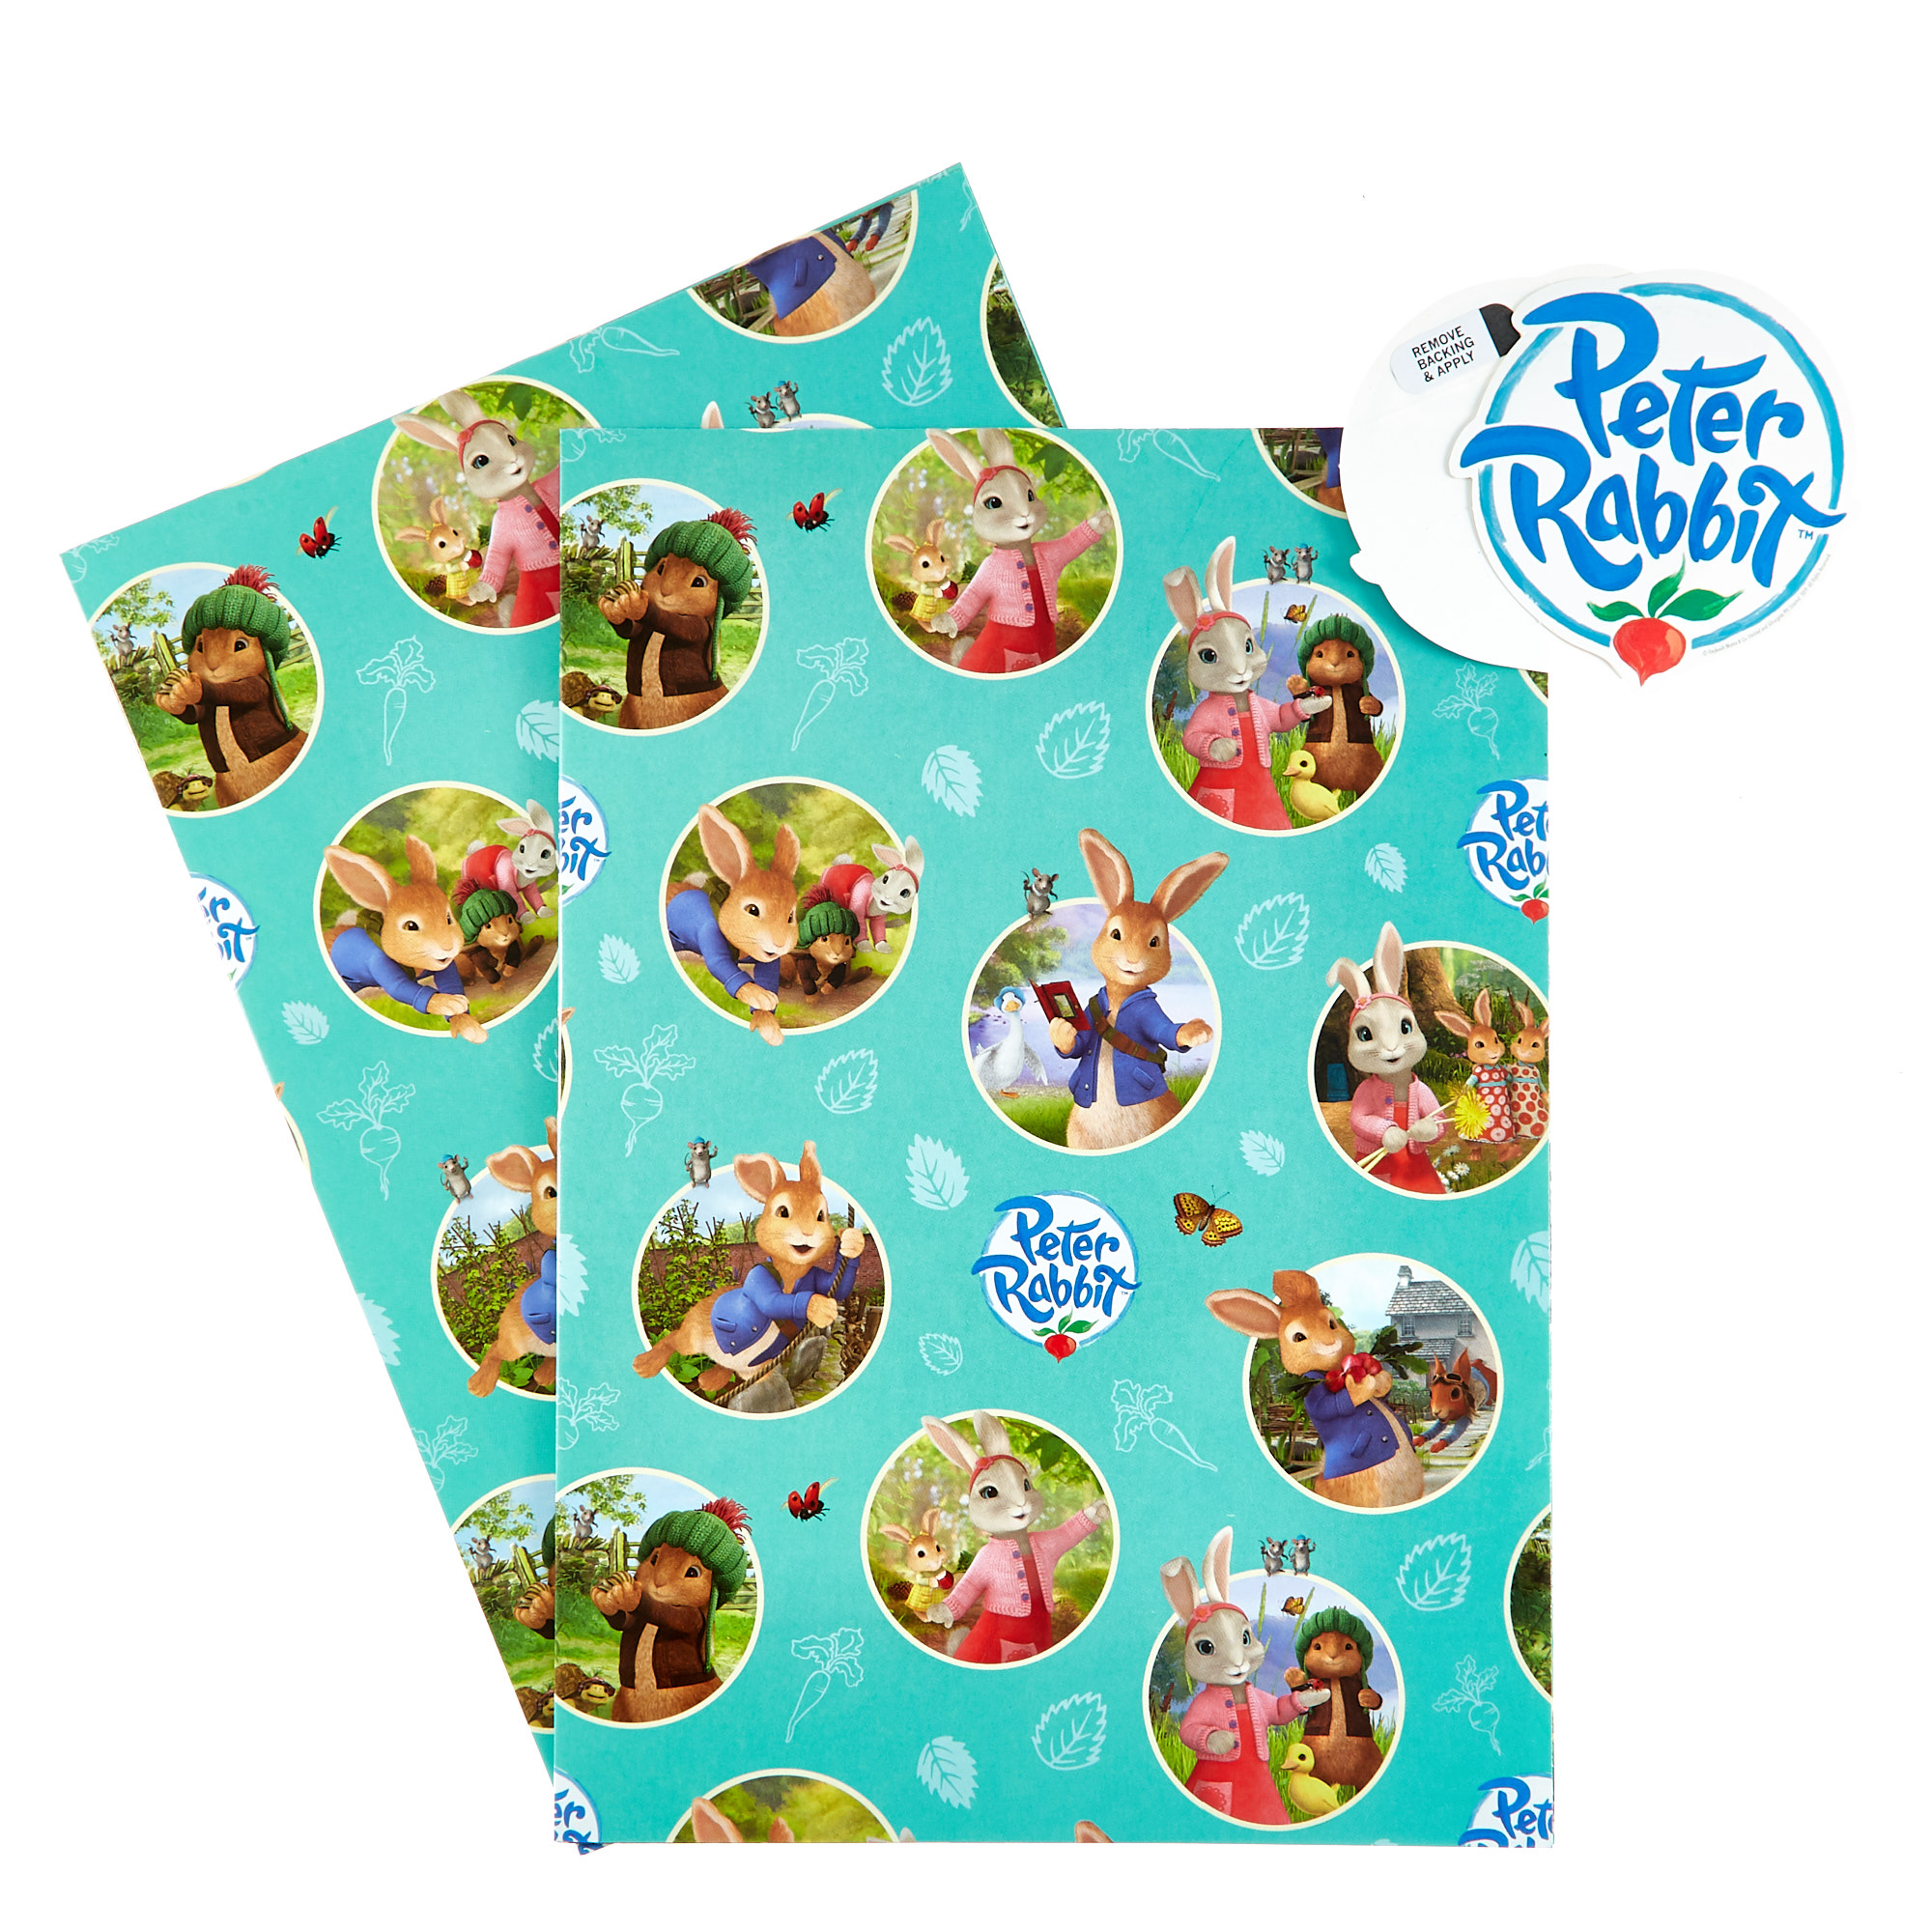 Peter Rabbit Wrapping Paper & Gift Tags - Pack Of 2 